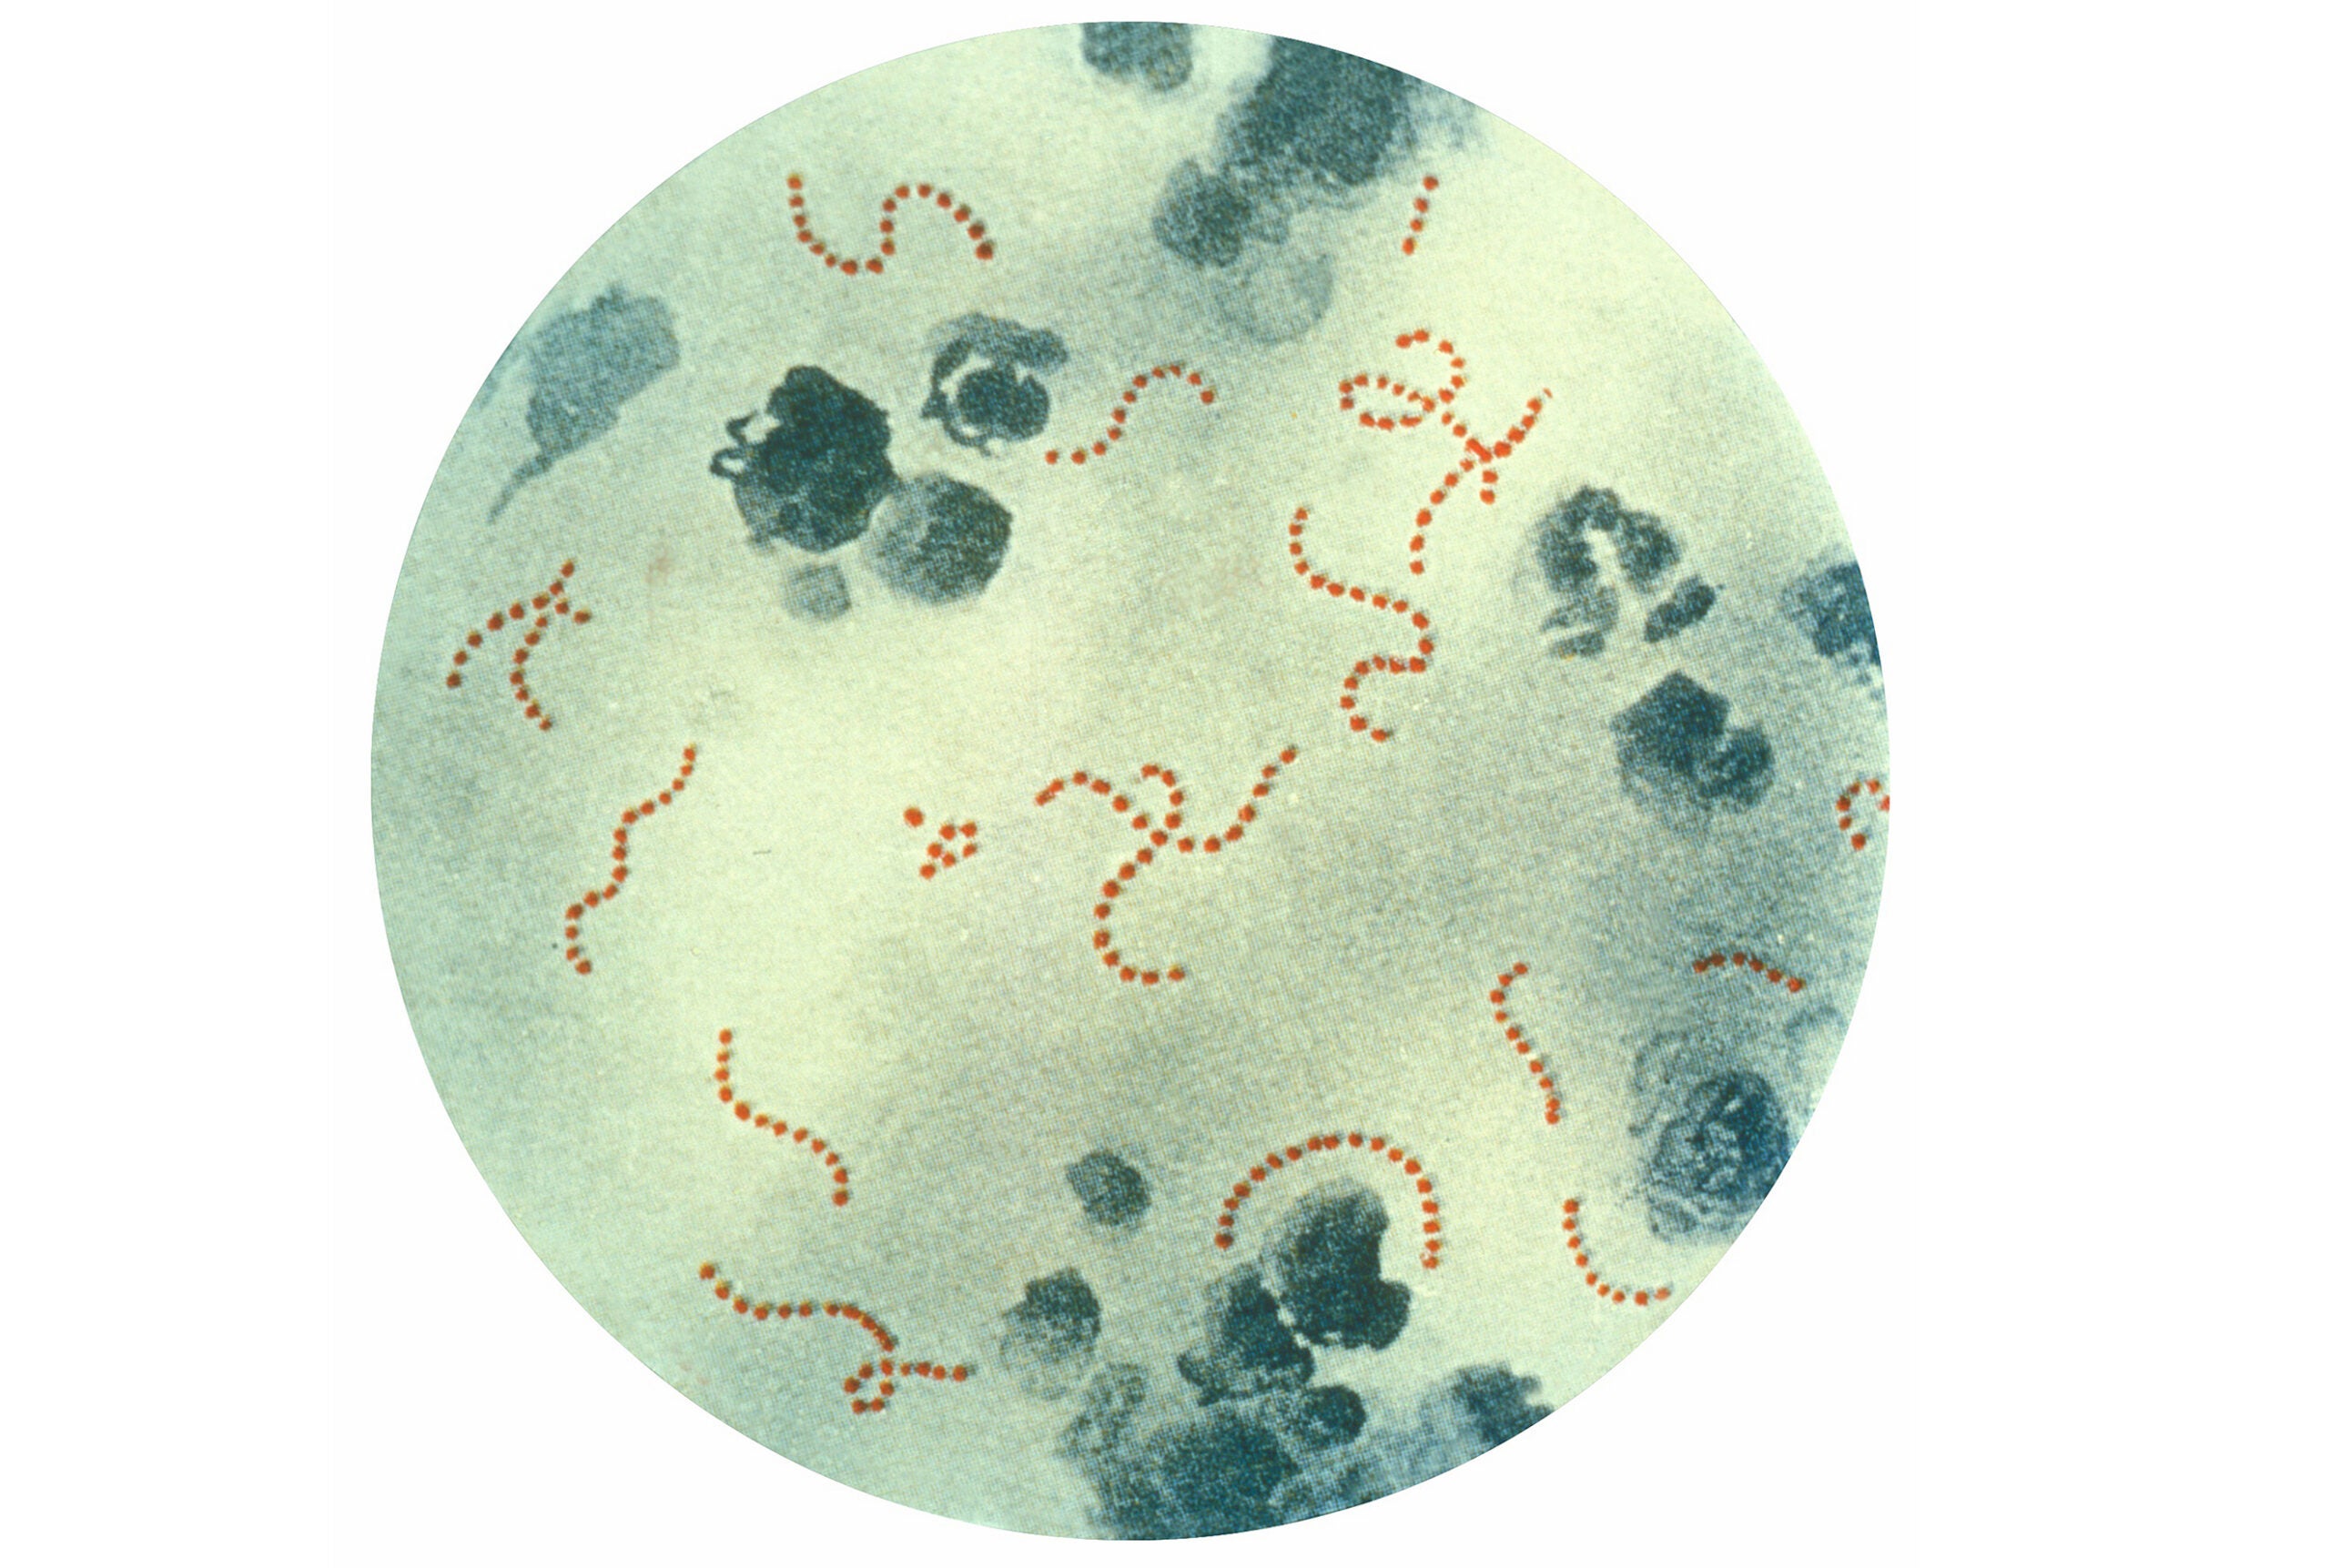 This illustration depicts a photomicrographic view of Streptococcus pyogenes bacteria